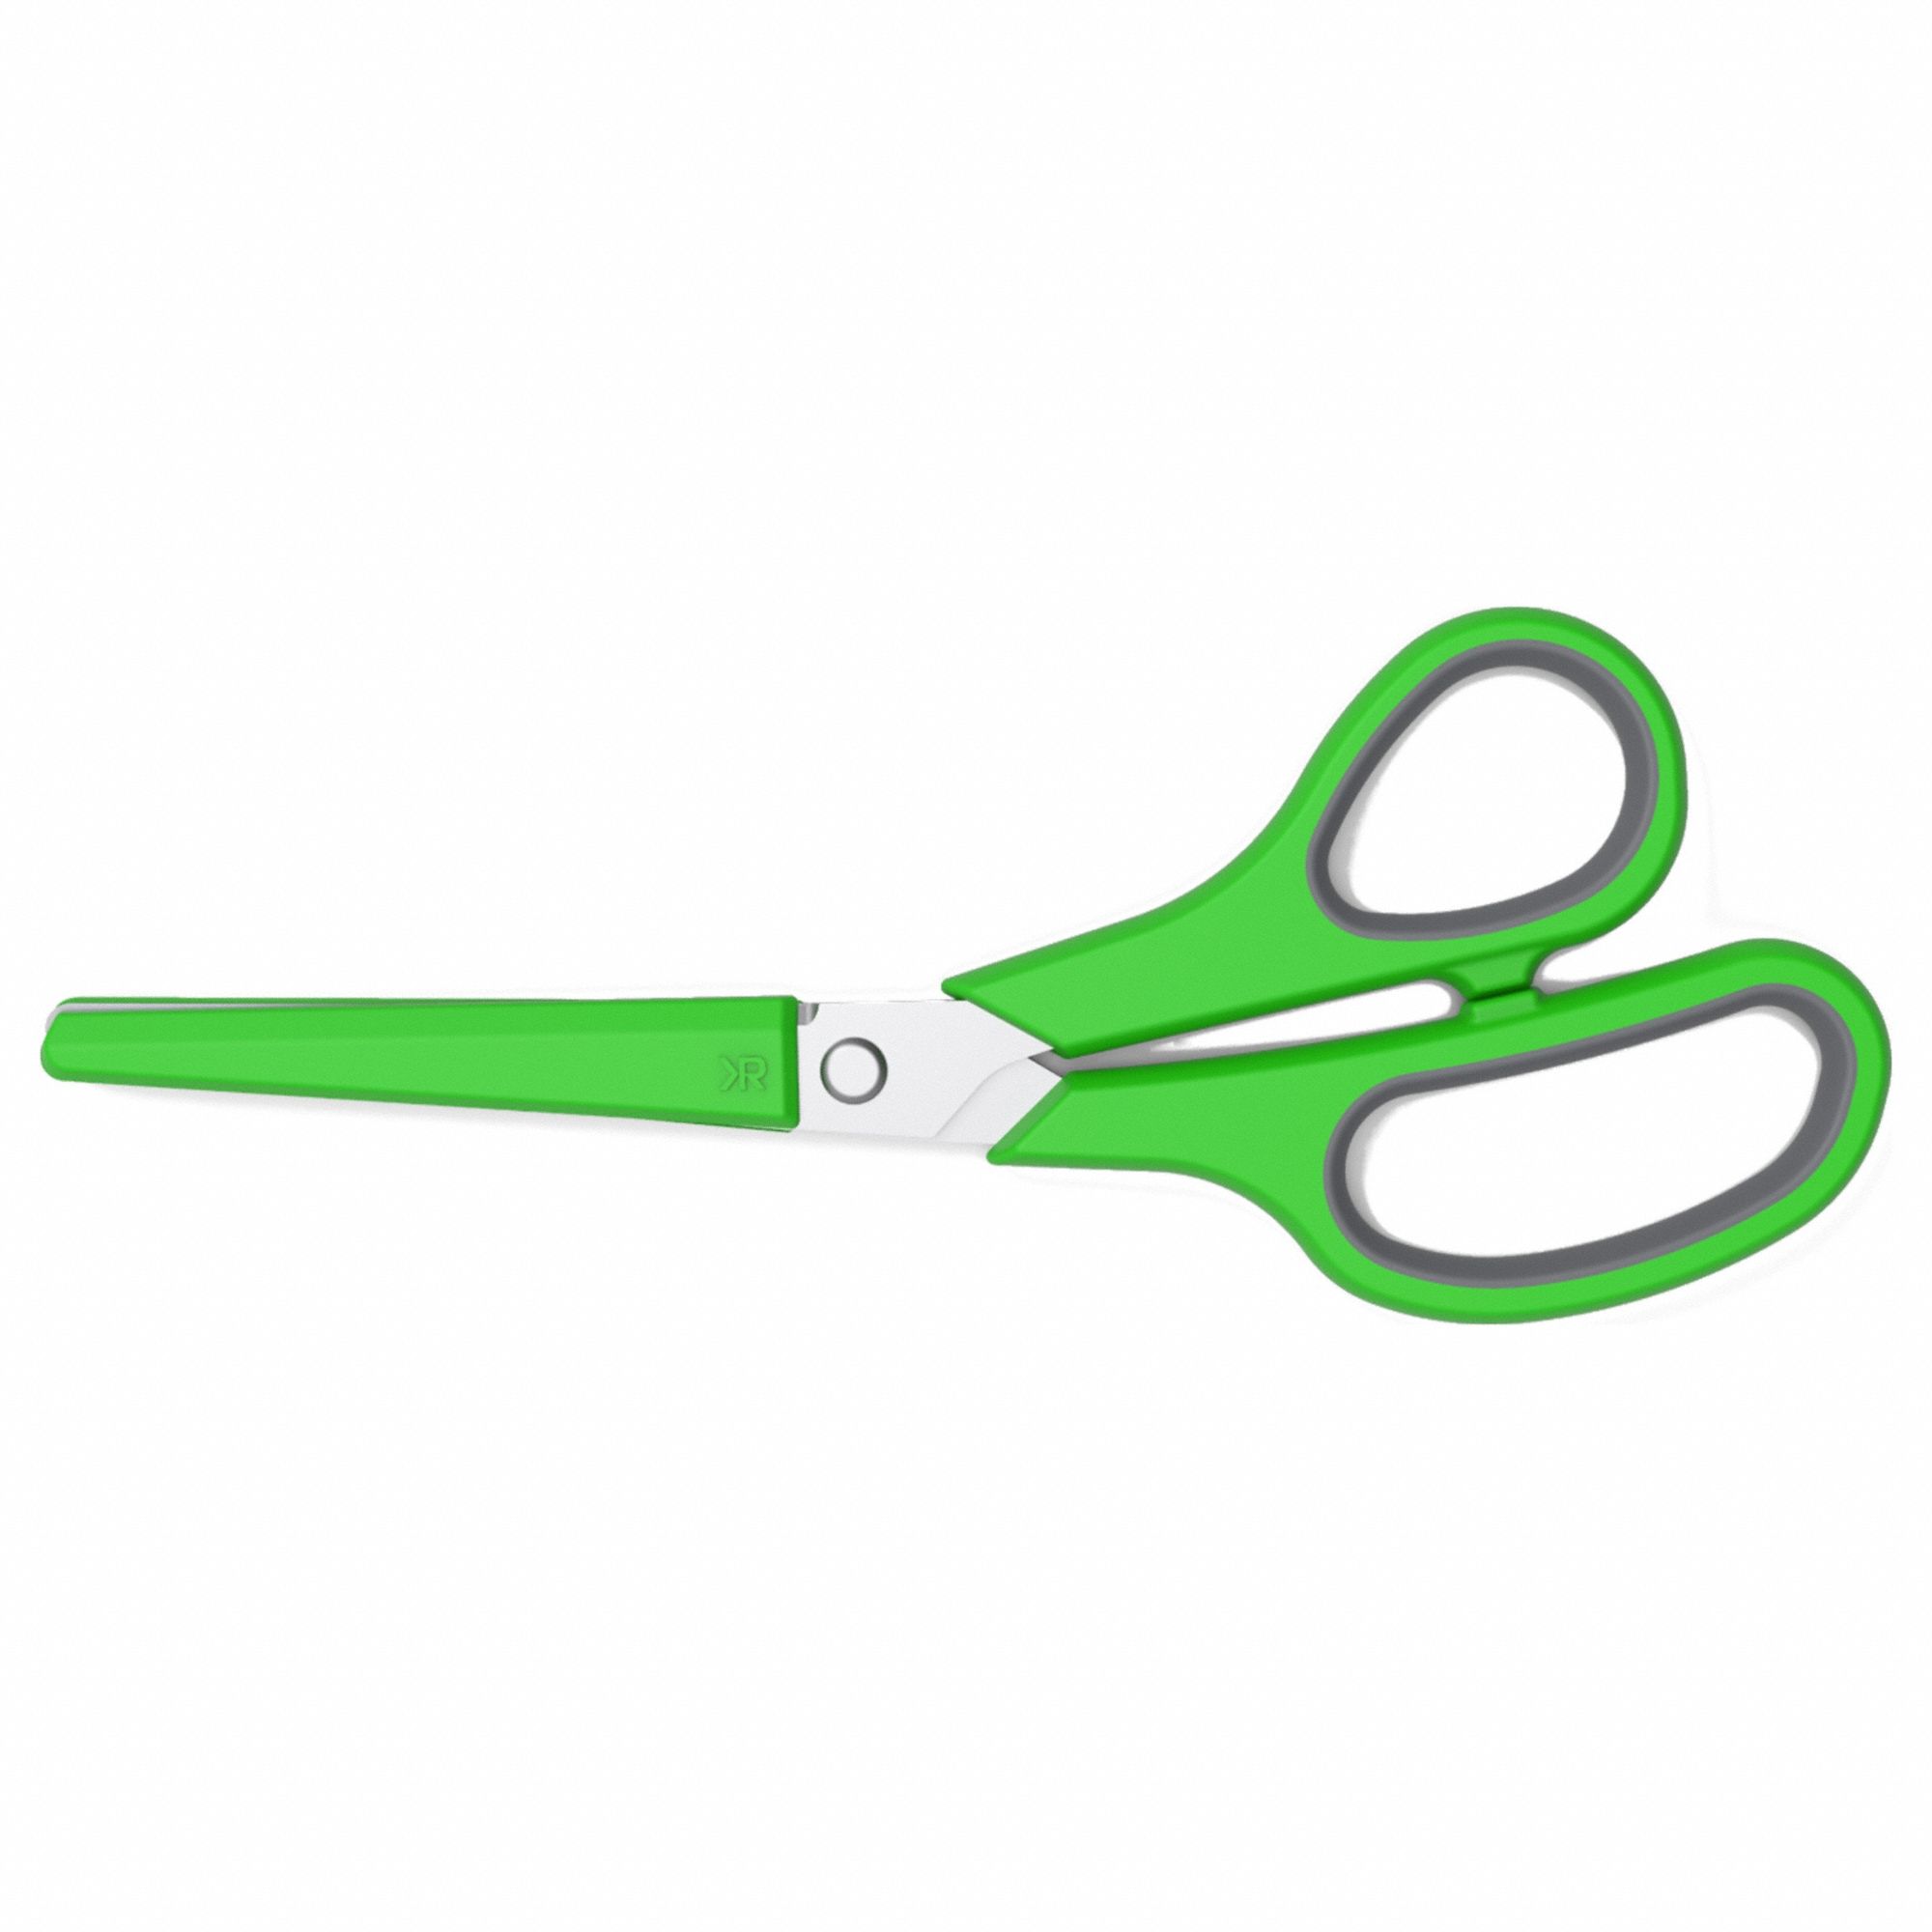 Scissors: Ambidextrous, 8 1/2 in Overall Lg, Straight, Steel, Rounded, Green